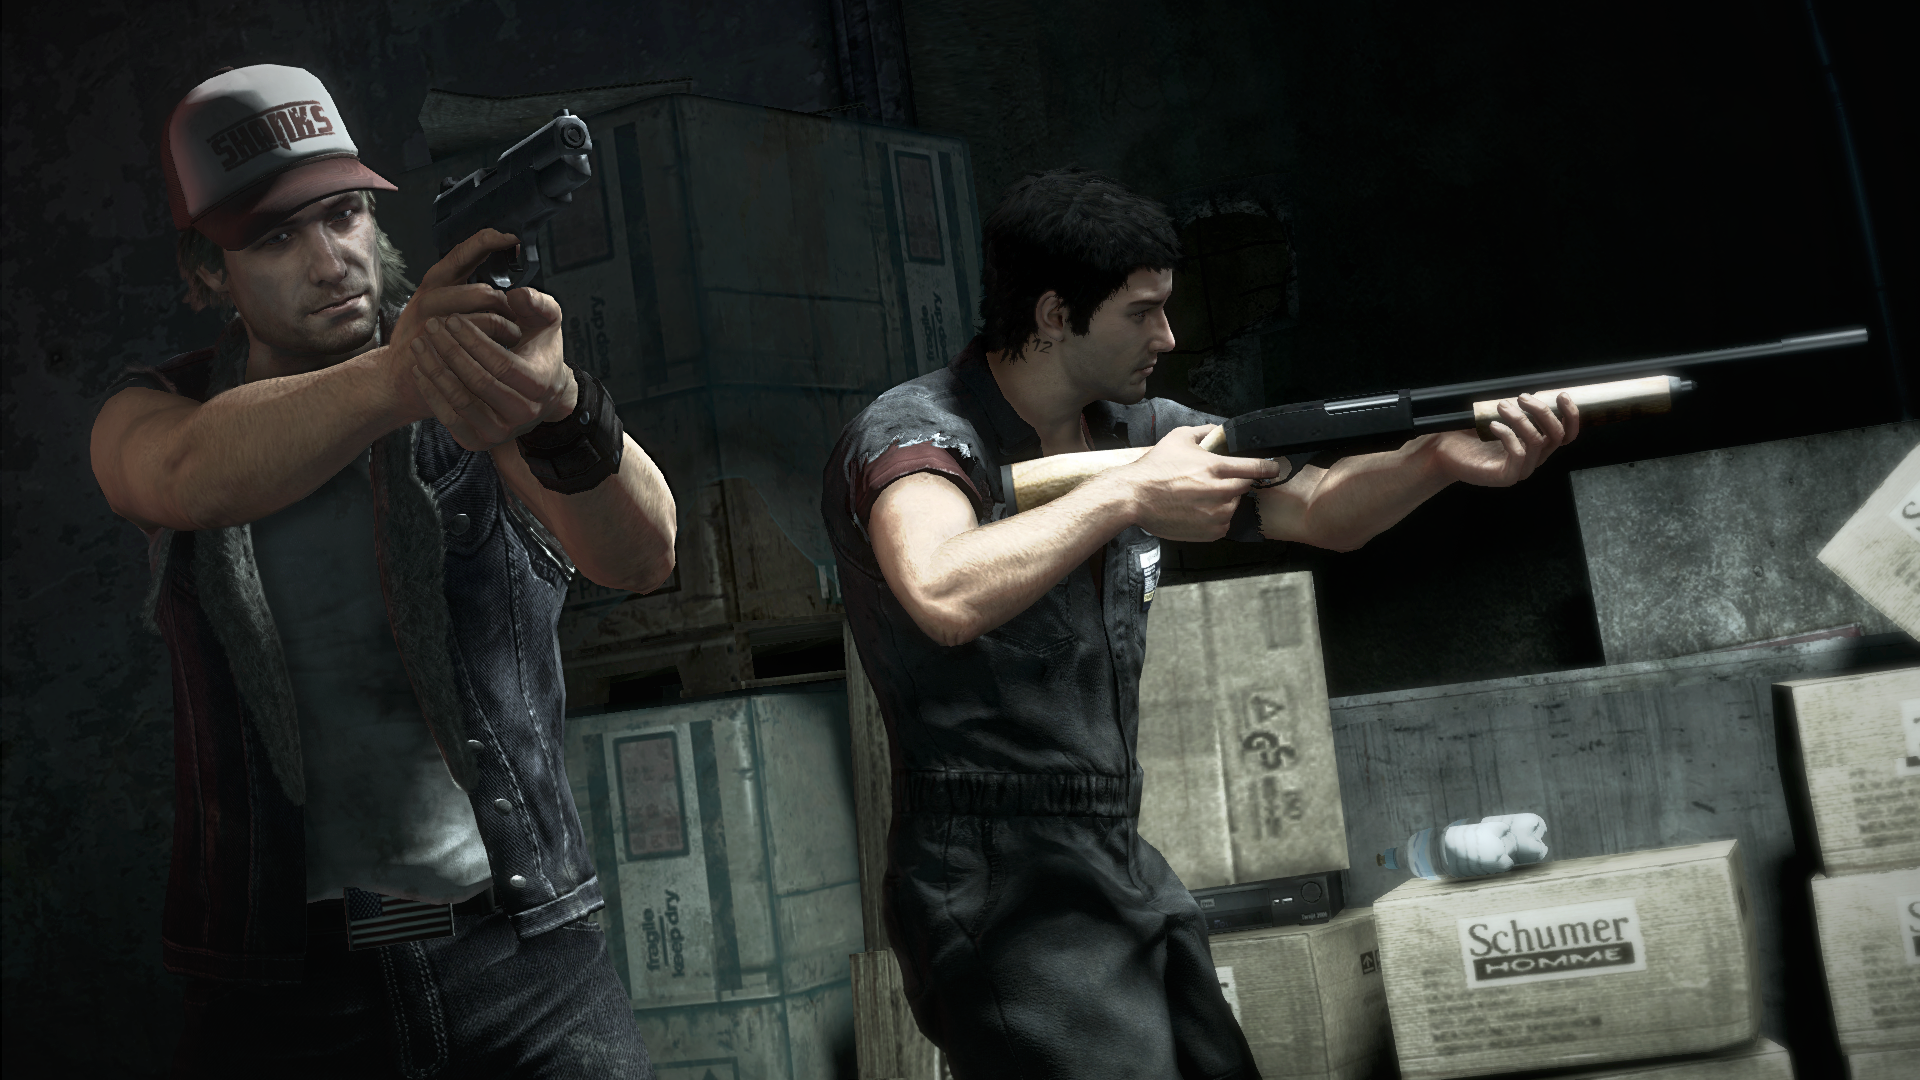 Say Hello To Dead Rising 3’s Craziest Weapons (And Co-Op Buddy)